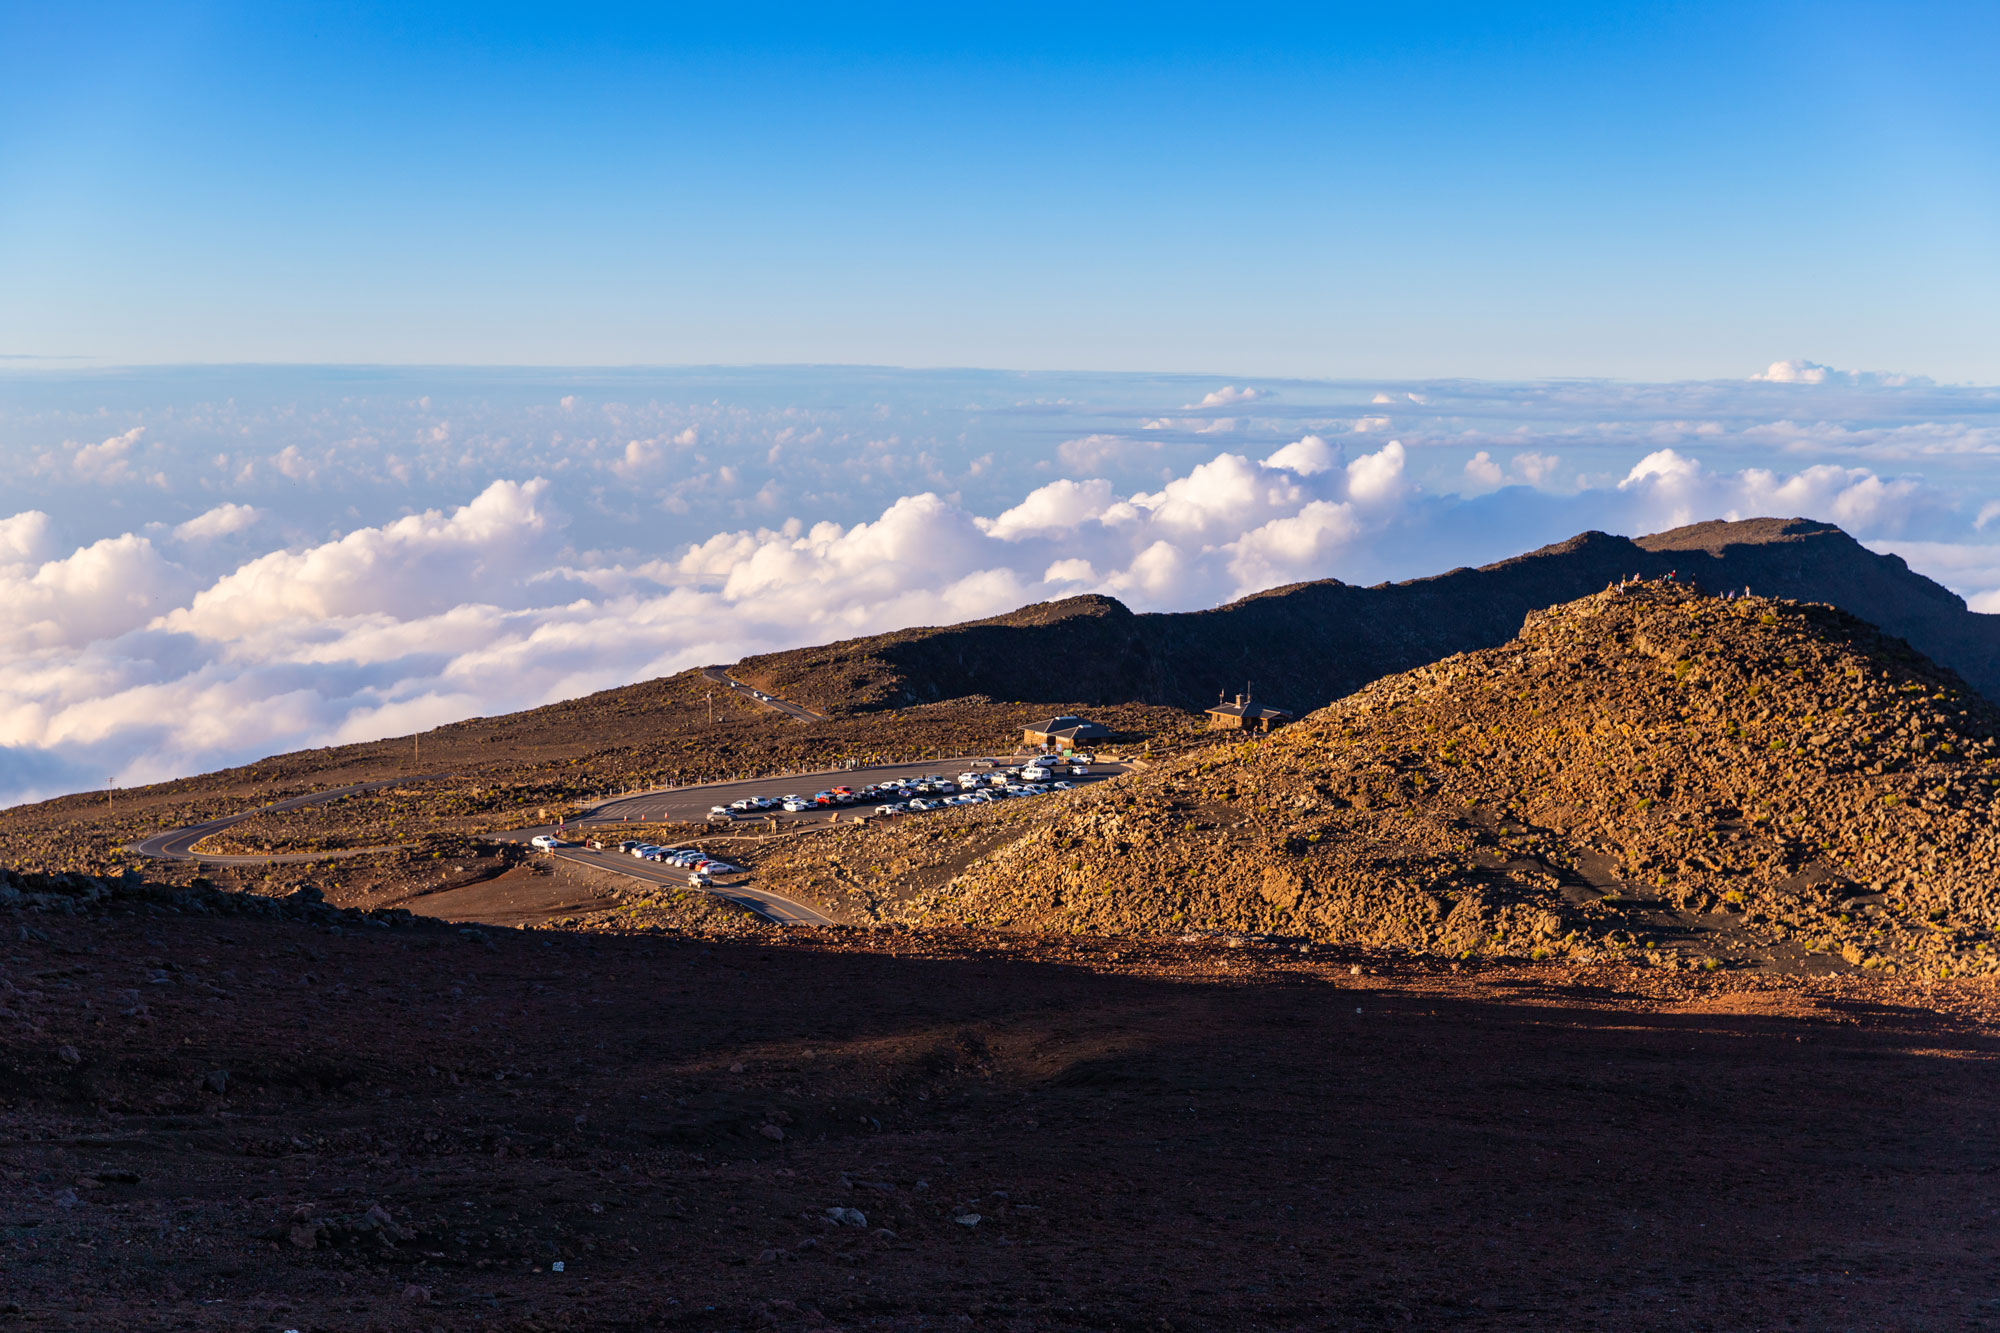 Photograph of the summit of Mount Haleakala on Maui. The photo shows a dry, barren beak with a parking area that has cars in it, next to which are some small buildings. Below the summit, clouds cover the sky, obscuring the ground below.